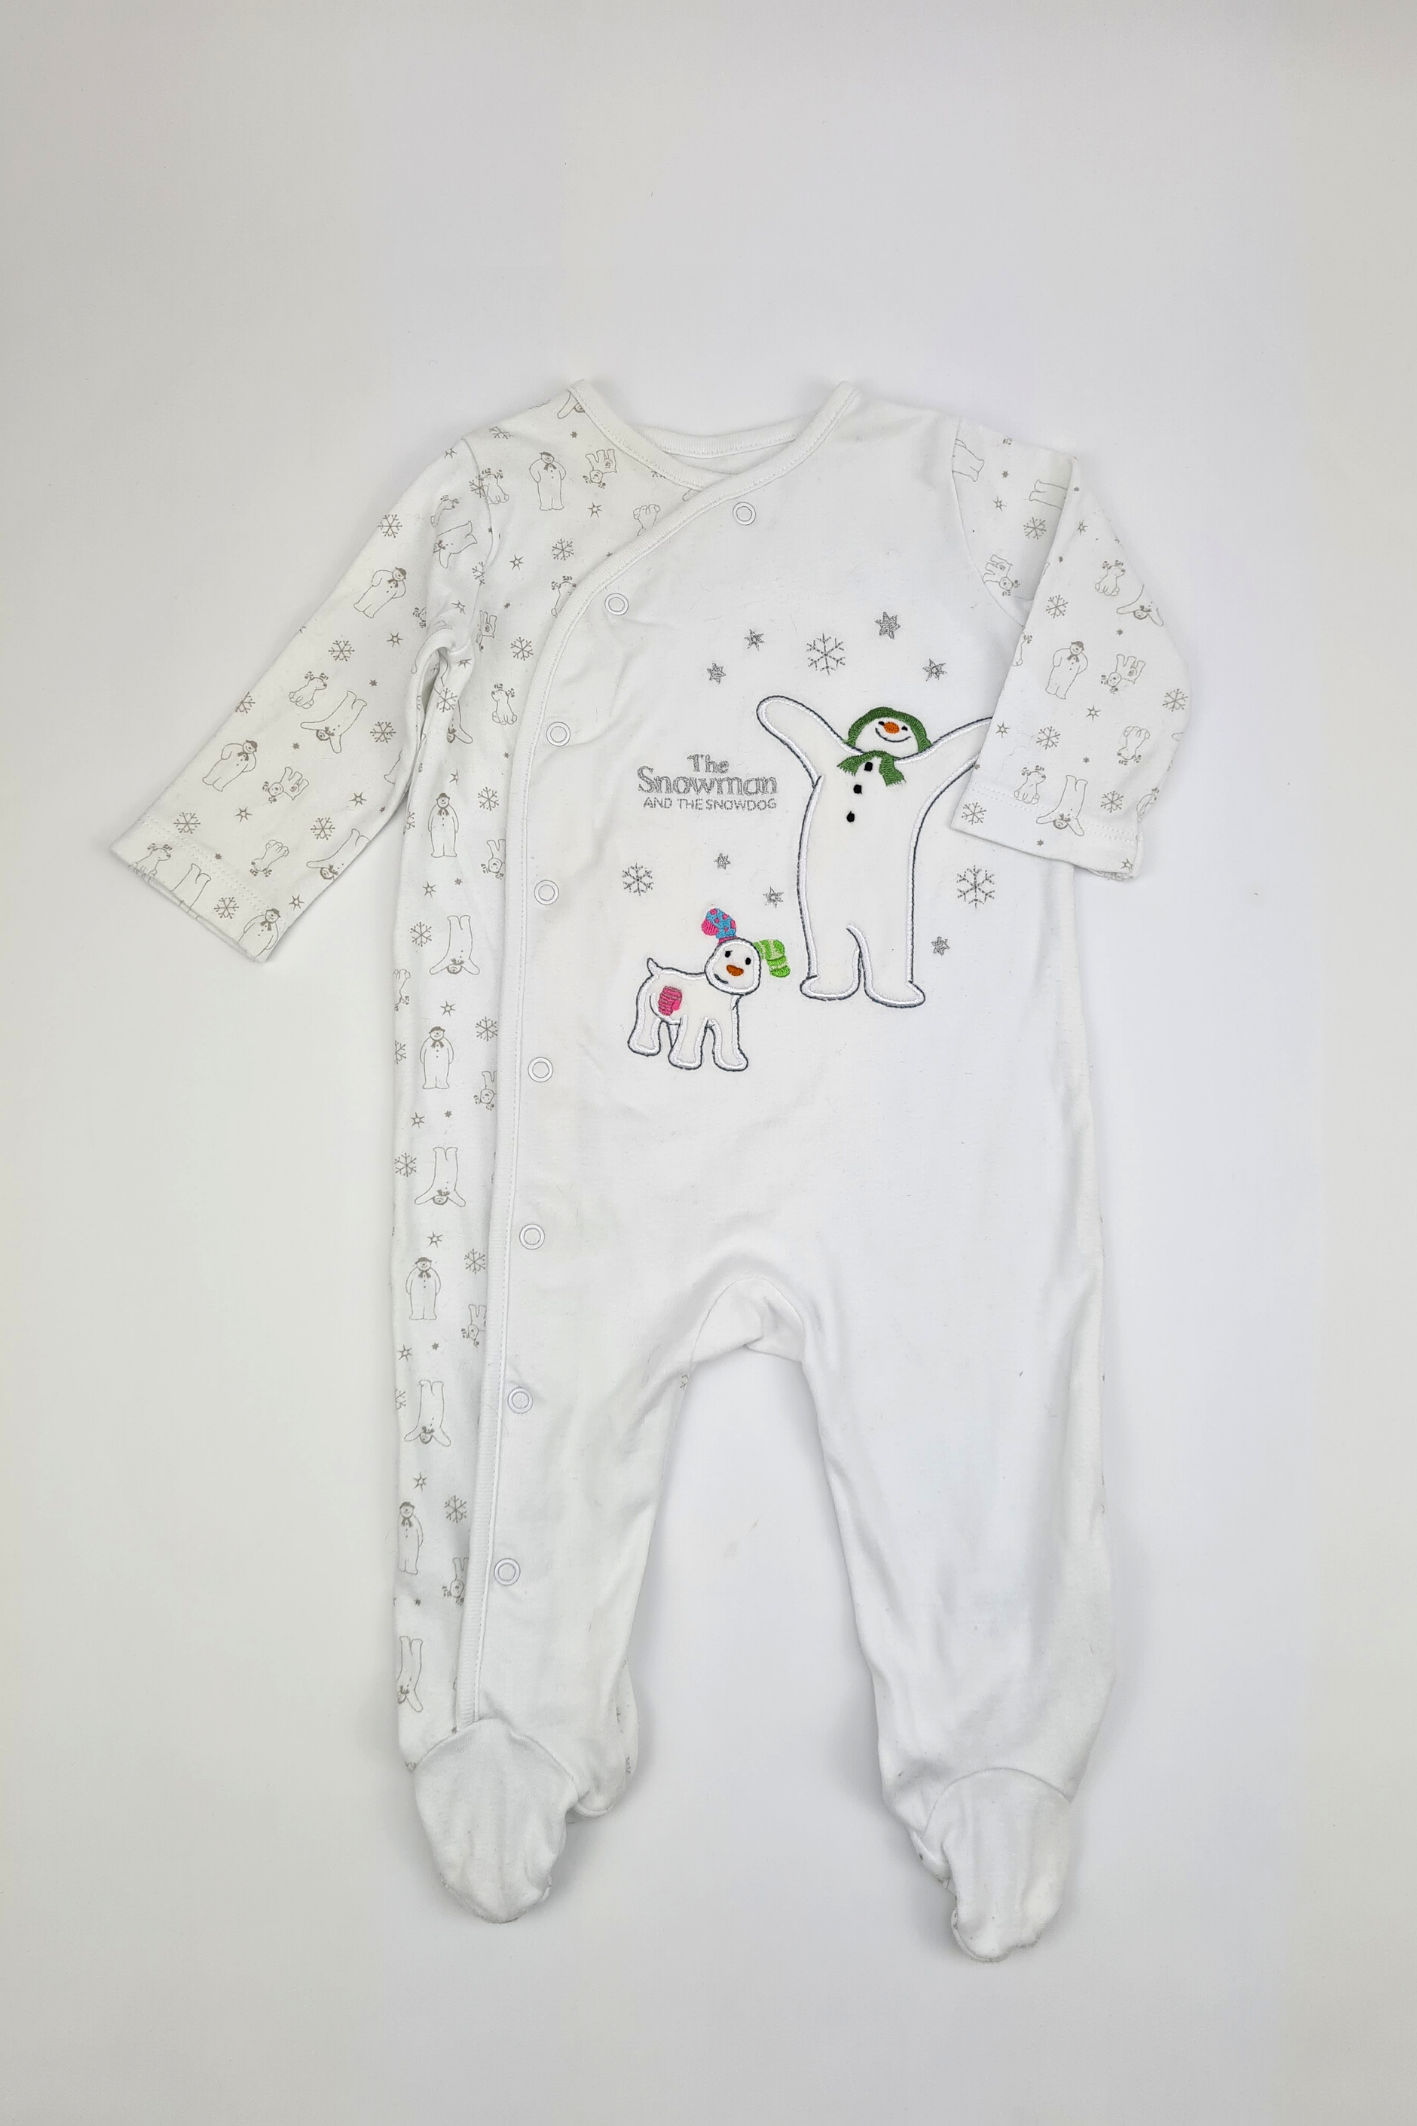 6-9m - The Snowman And The Snowdog Sleepsuit